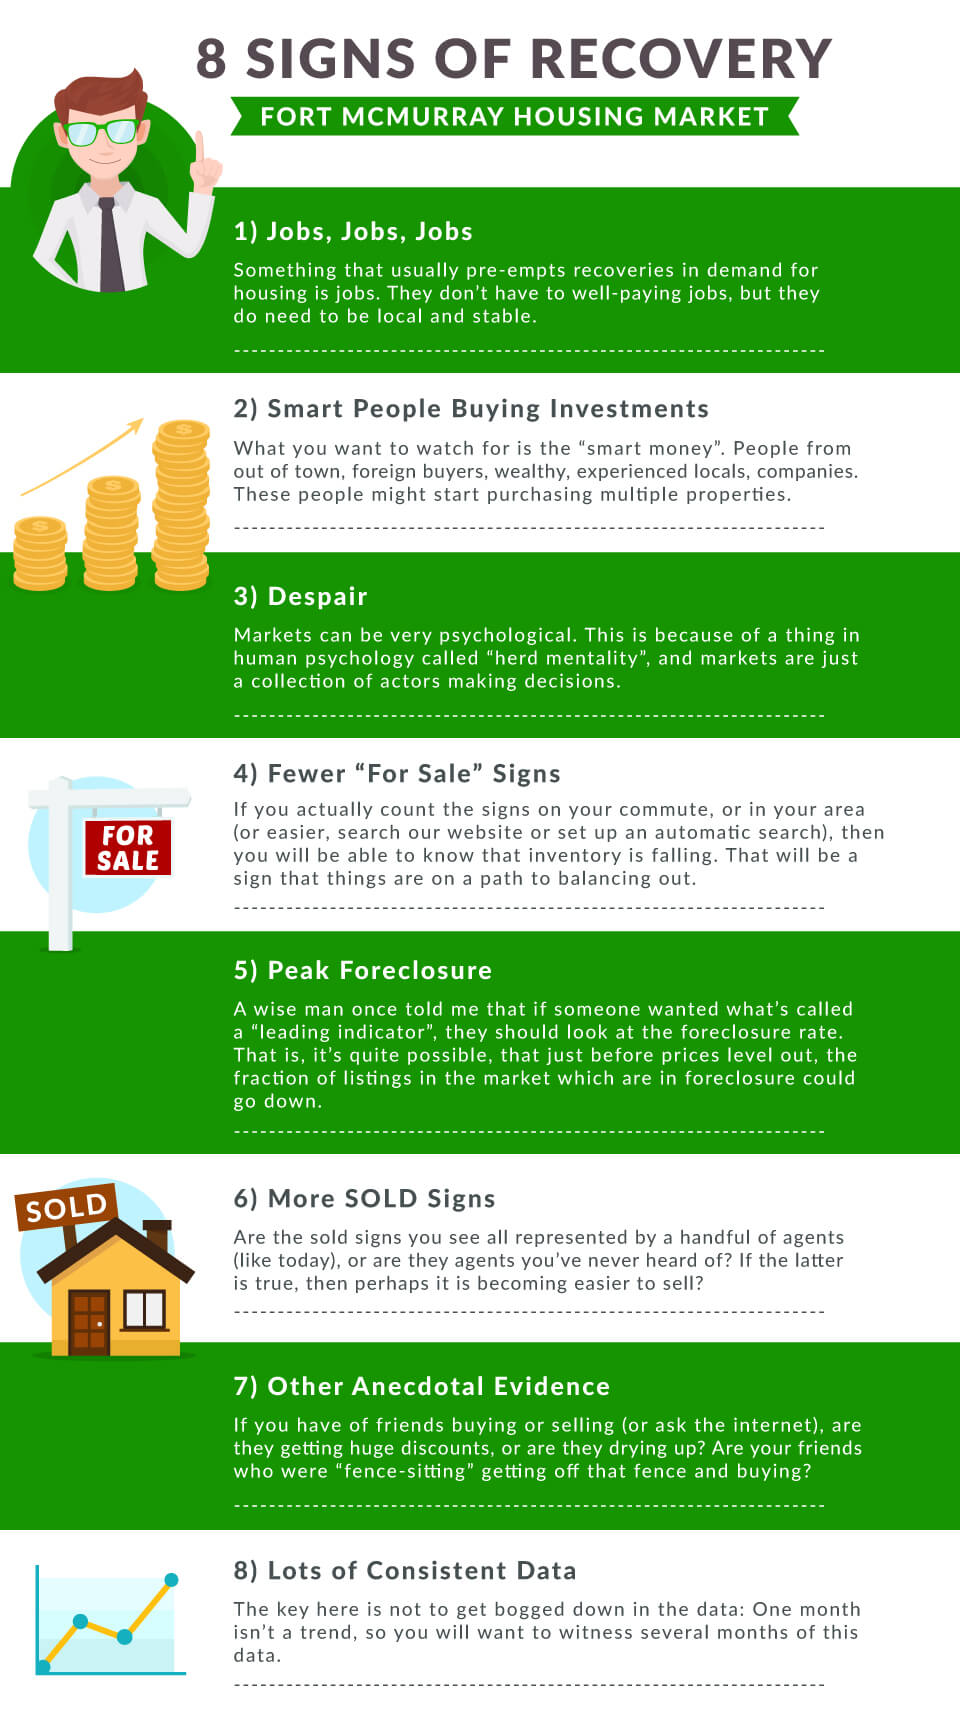 infographic revealing eight signs of fort mcmurray housing market recovery